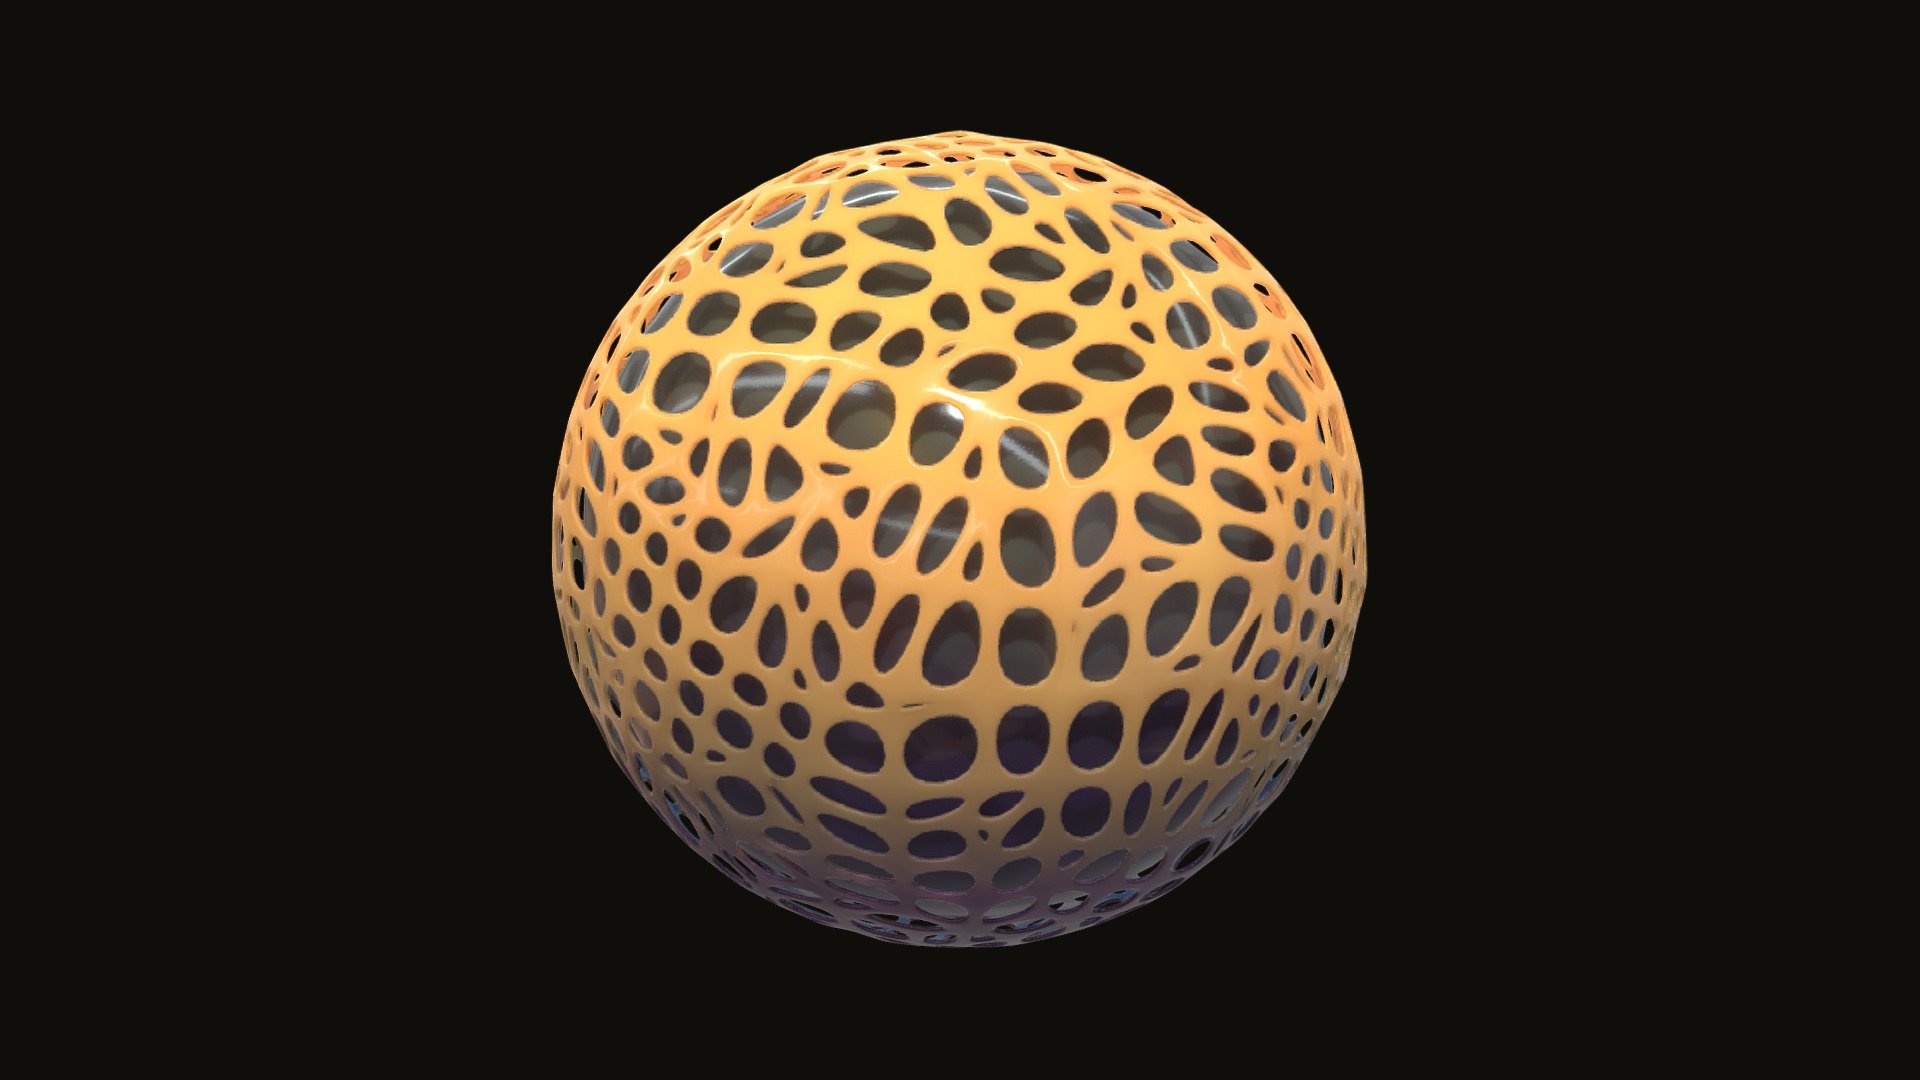 Originally modeled in Cinema 4D R 21



Maps for Sphere Design




BaseColor

Metallic

Roughness

Normal



SCALE:
- Model at world center and real scale:
       Metric in centimeter
       1 unit = 1 centimeter



Texture resolution 2048x2048
Texture format PNG



Poly Count :
Polygon Count - 153736
Vertex Count - 310848
No N-Gons - Sphere Design - Buy Royalty Free 3D model by zames1992 3d model